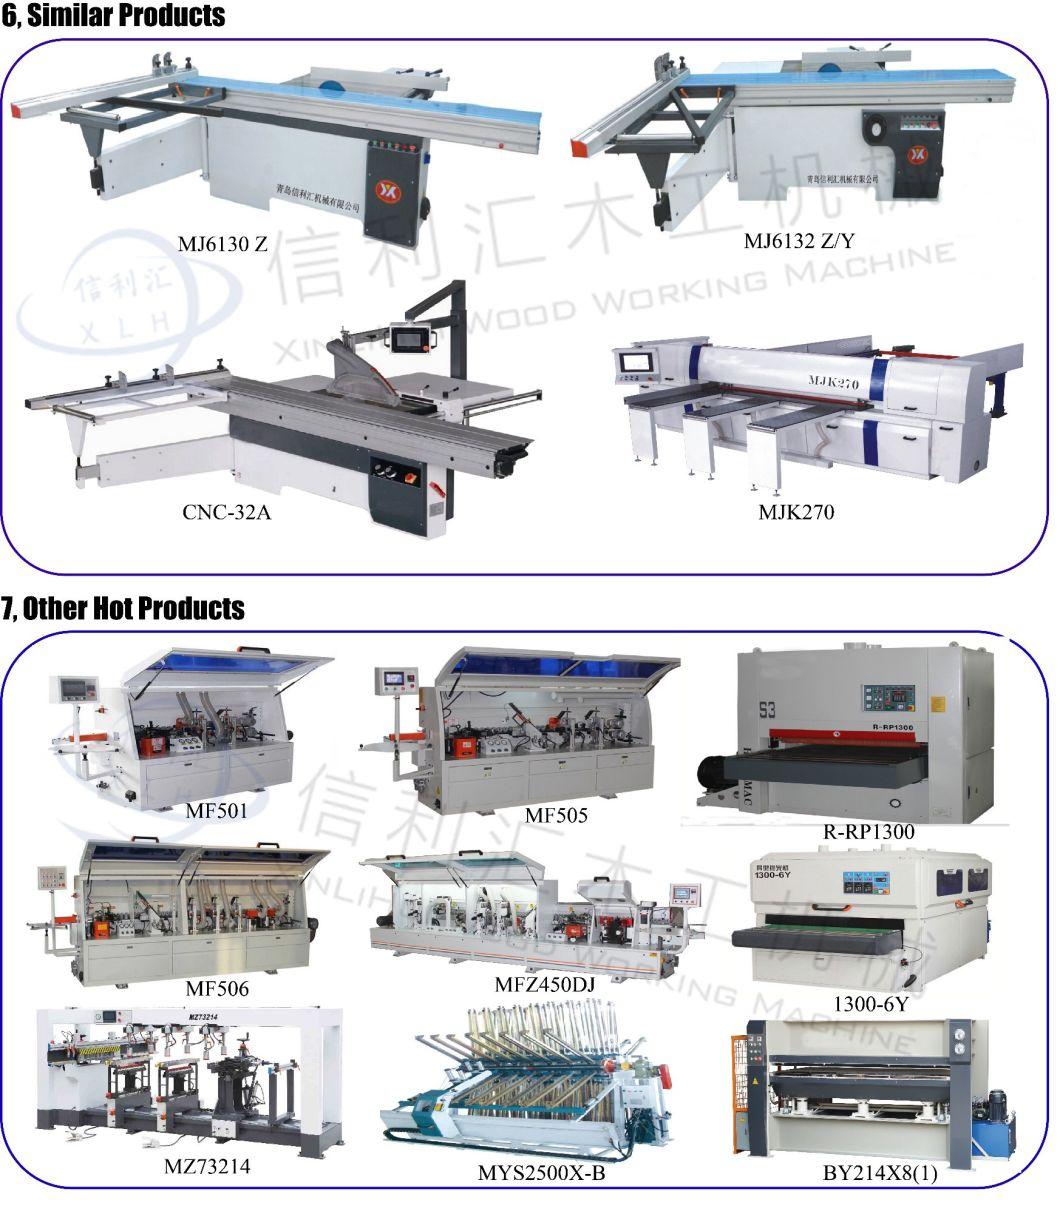 2800/ 3000/ 3200/ 3800mm Double Blade Sliding Table Panel Saw Wood Working Machine Used in The Wood Processing Made in China in Greece